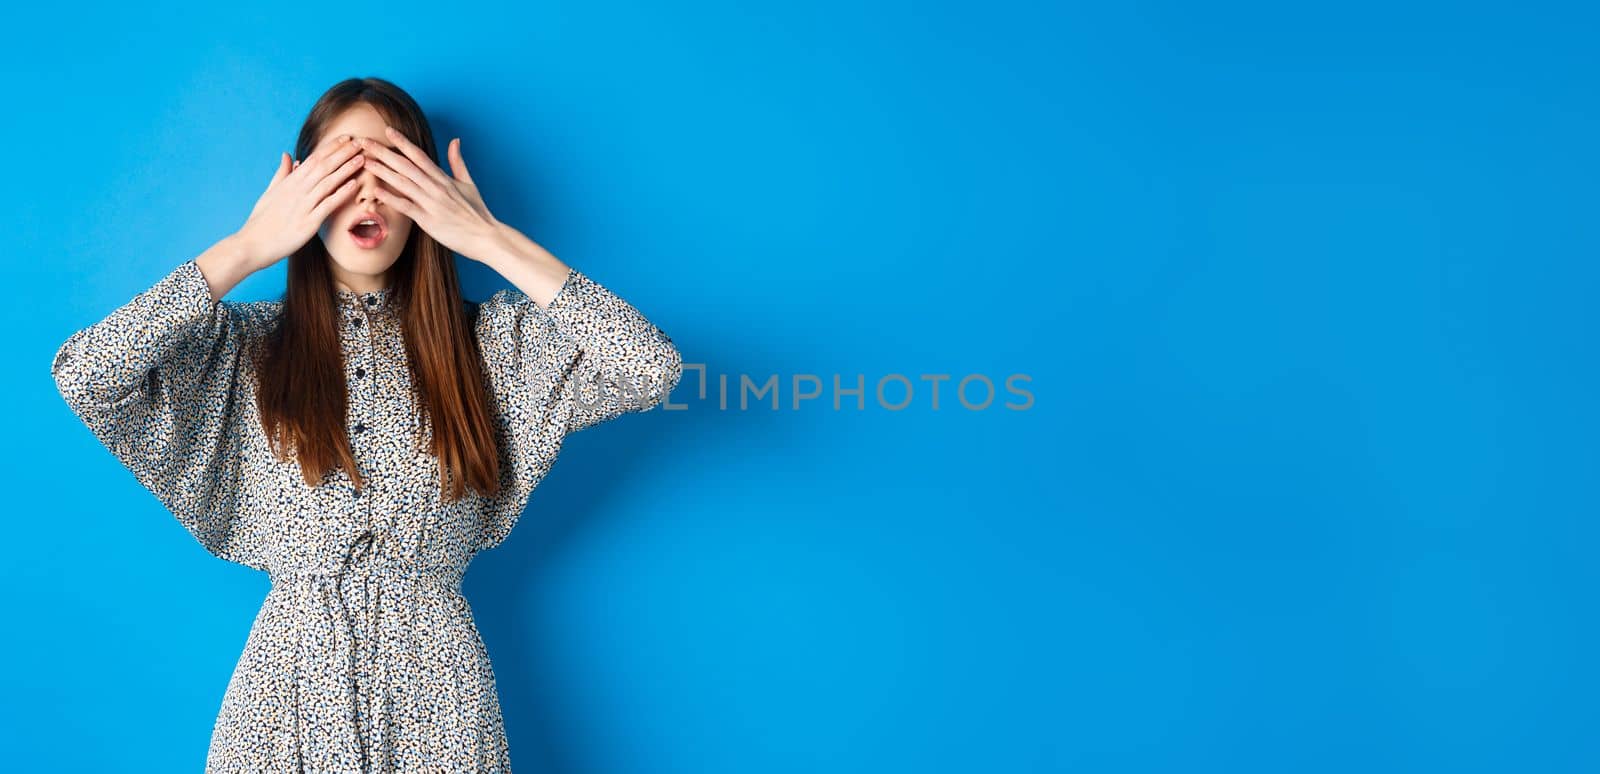 Excited girl waiting for surprise while eyes covered with hands, standing intrigued on blue background, wearing dress.